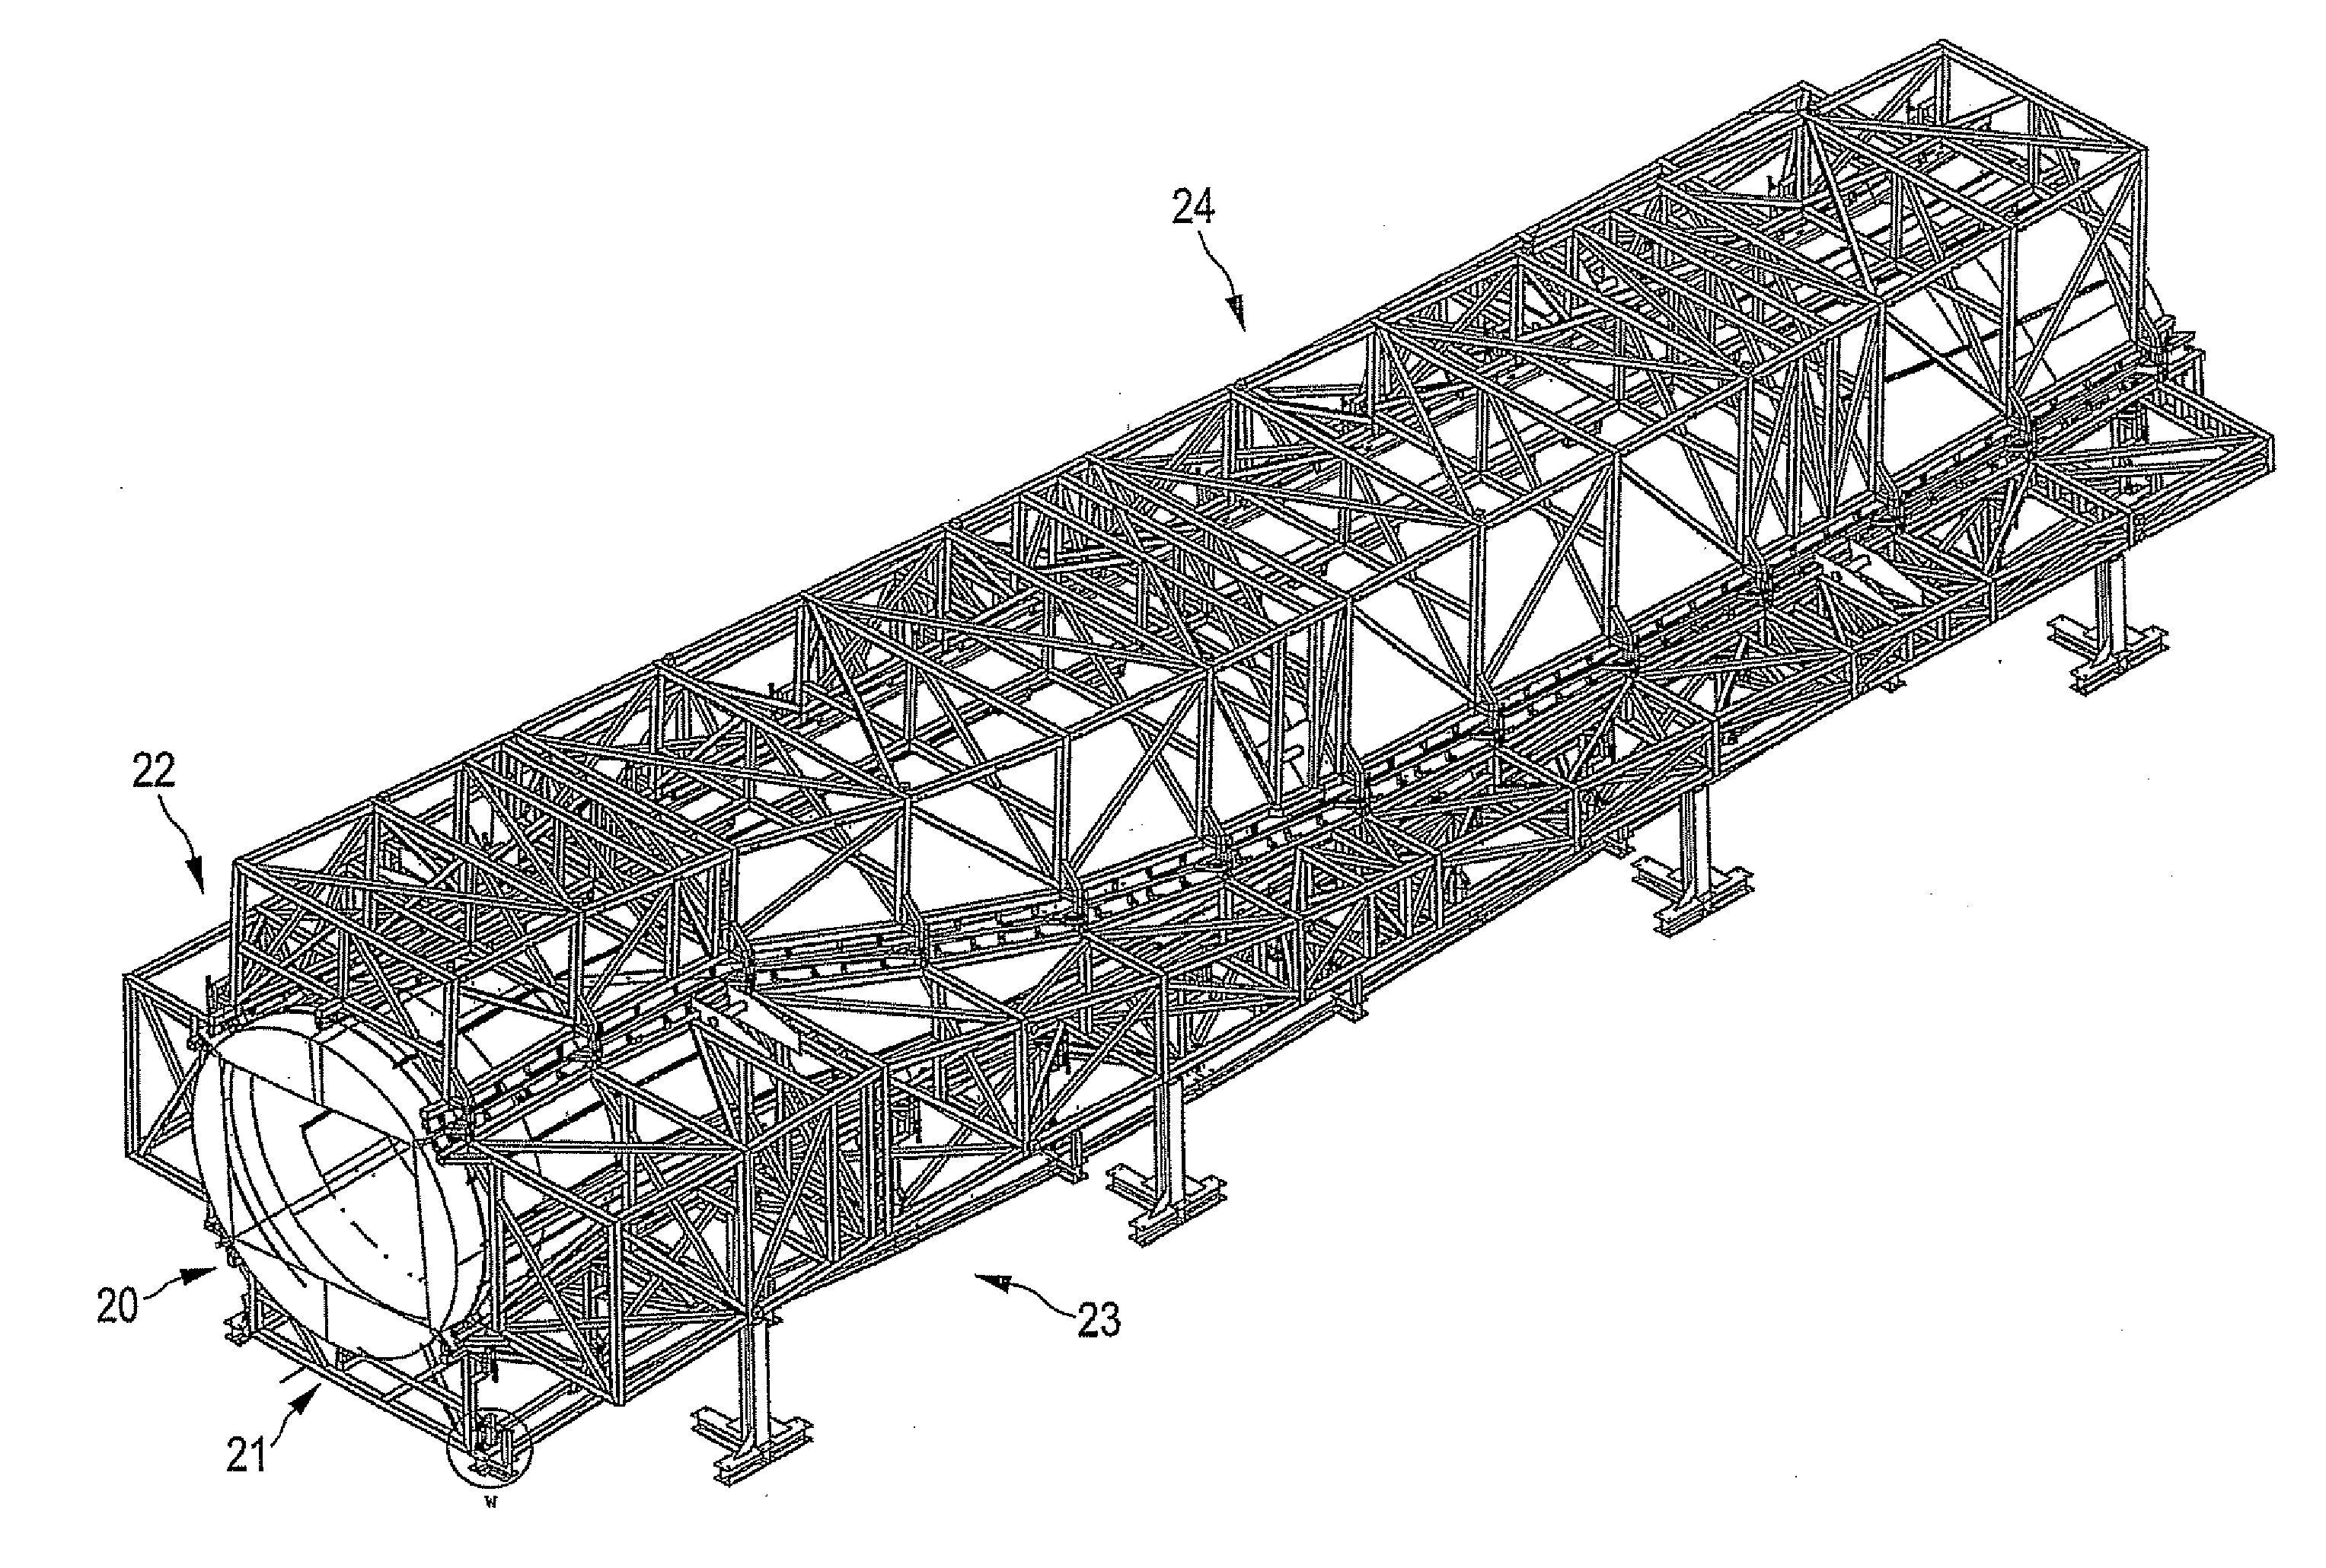 Rotor blade form for producing a rotor blade of a wind power plant